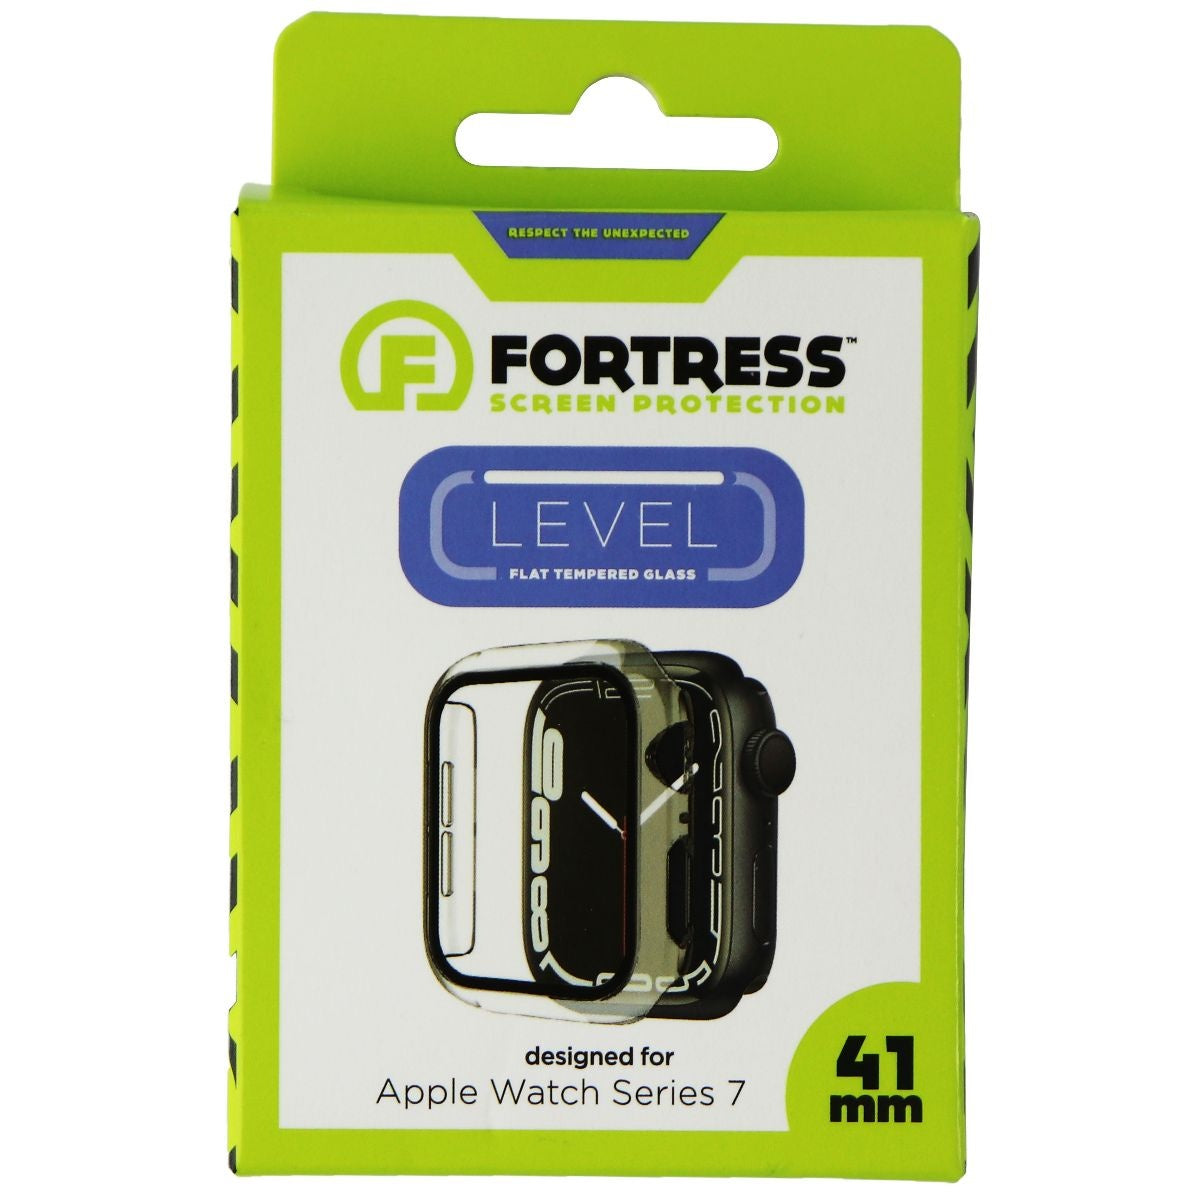 Fortress LEVEL Series Flat Tempered Glass for Apple Watch Series 7 (41mm) Clear